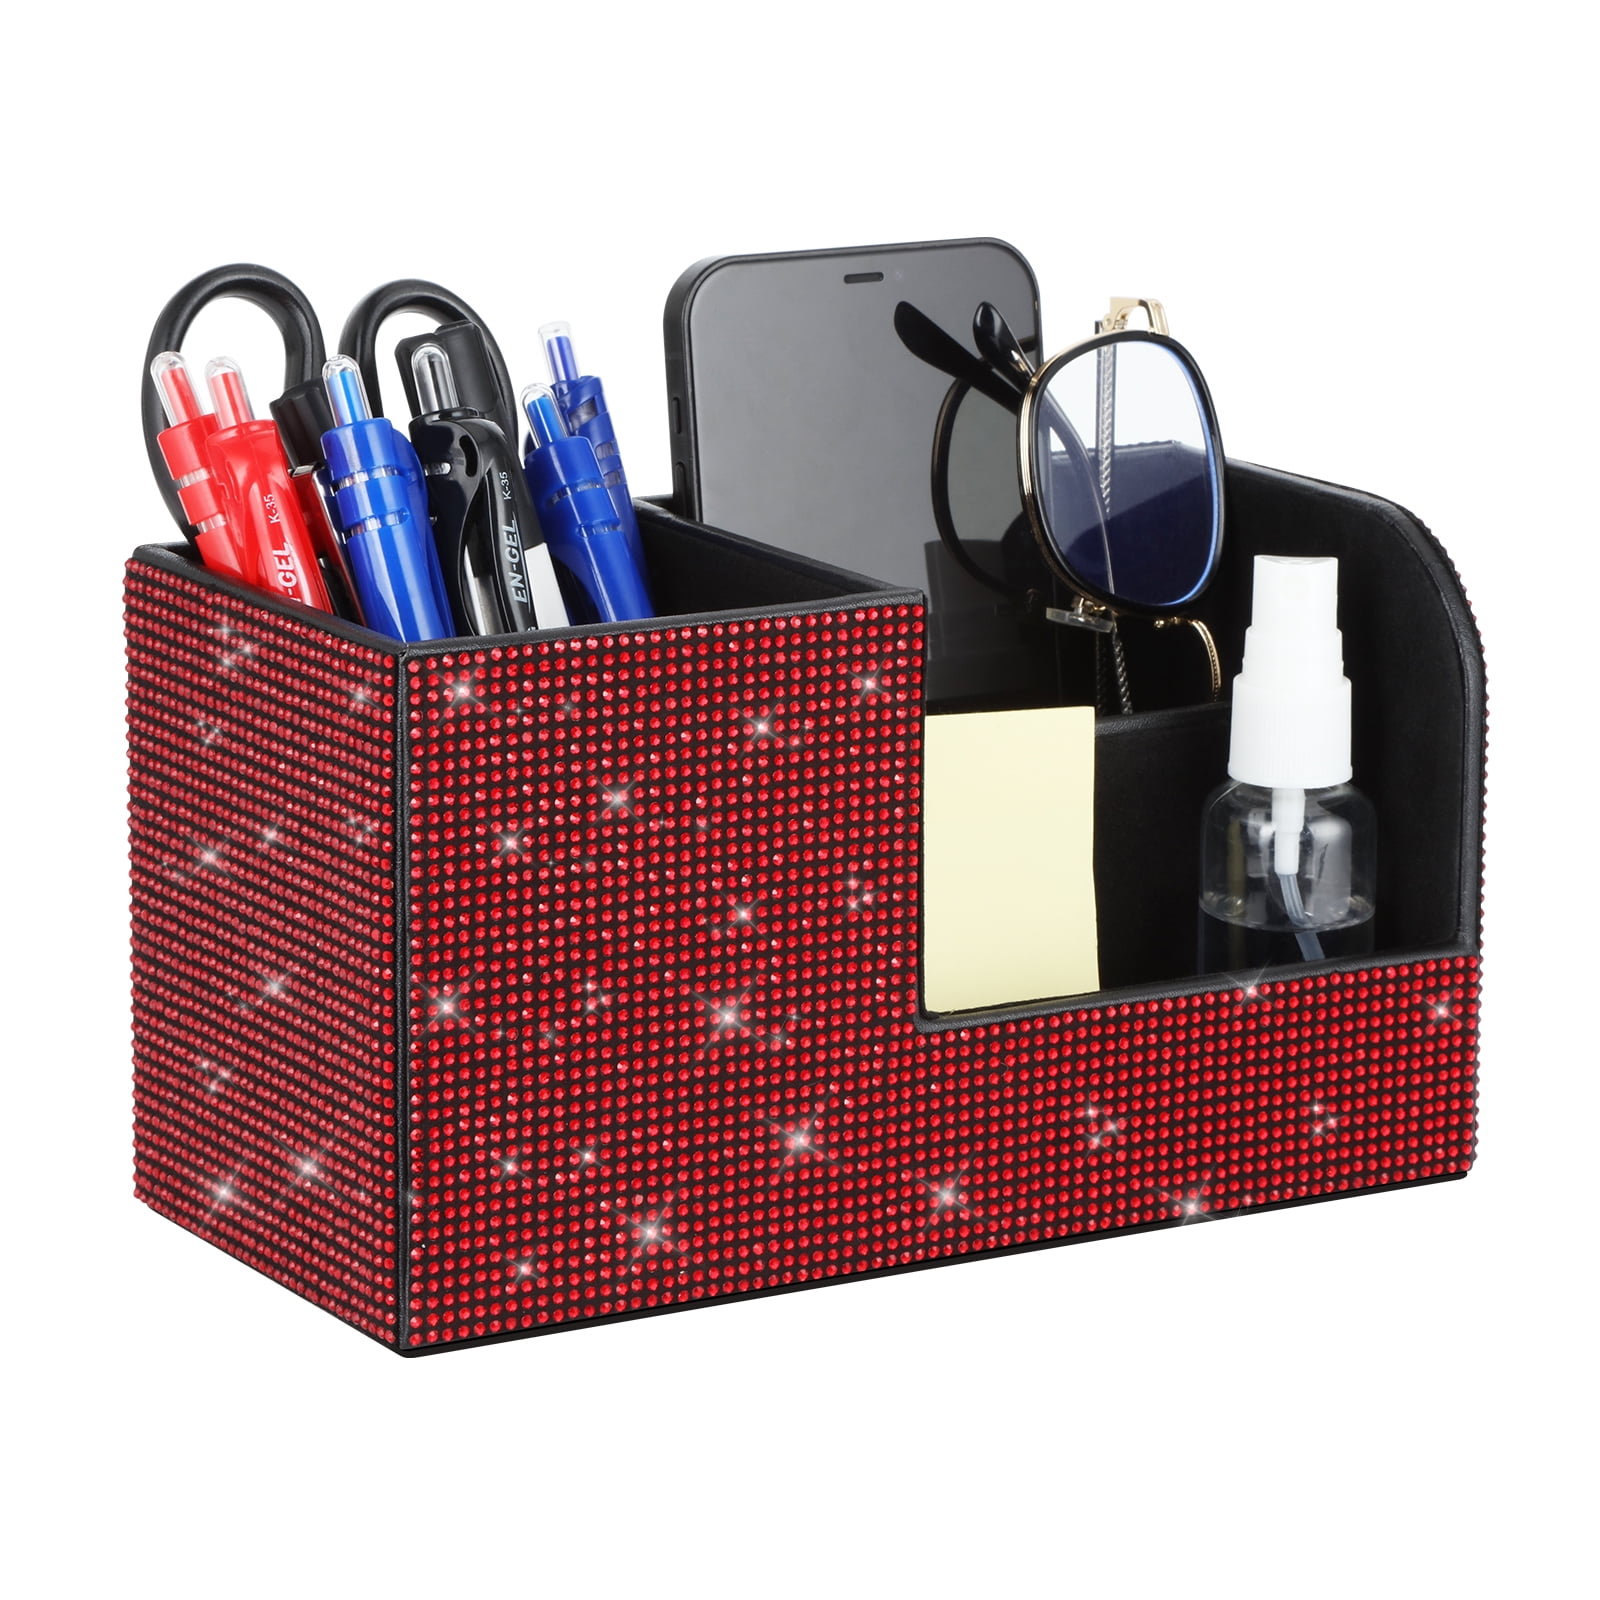 Multi-Function Desk Stationery Organizer Storage Box Pen Pencil Holder Business Cards Stand Mobile Phone/Remote Control Holder Office Supplies Holder Collection Desktop Organizer Brown 